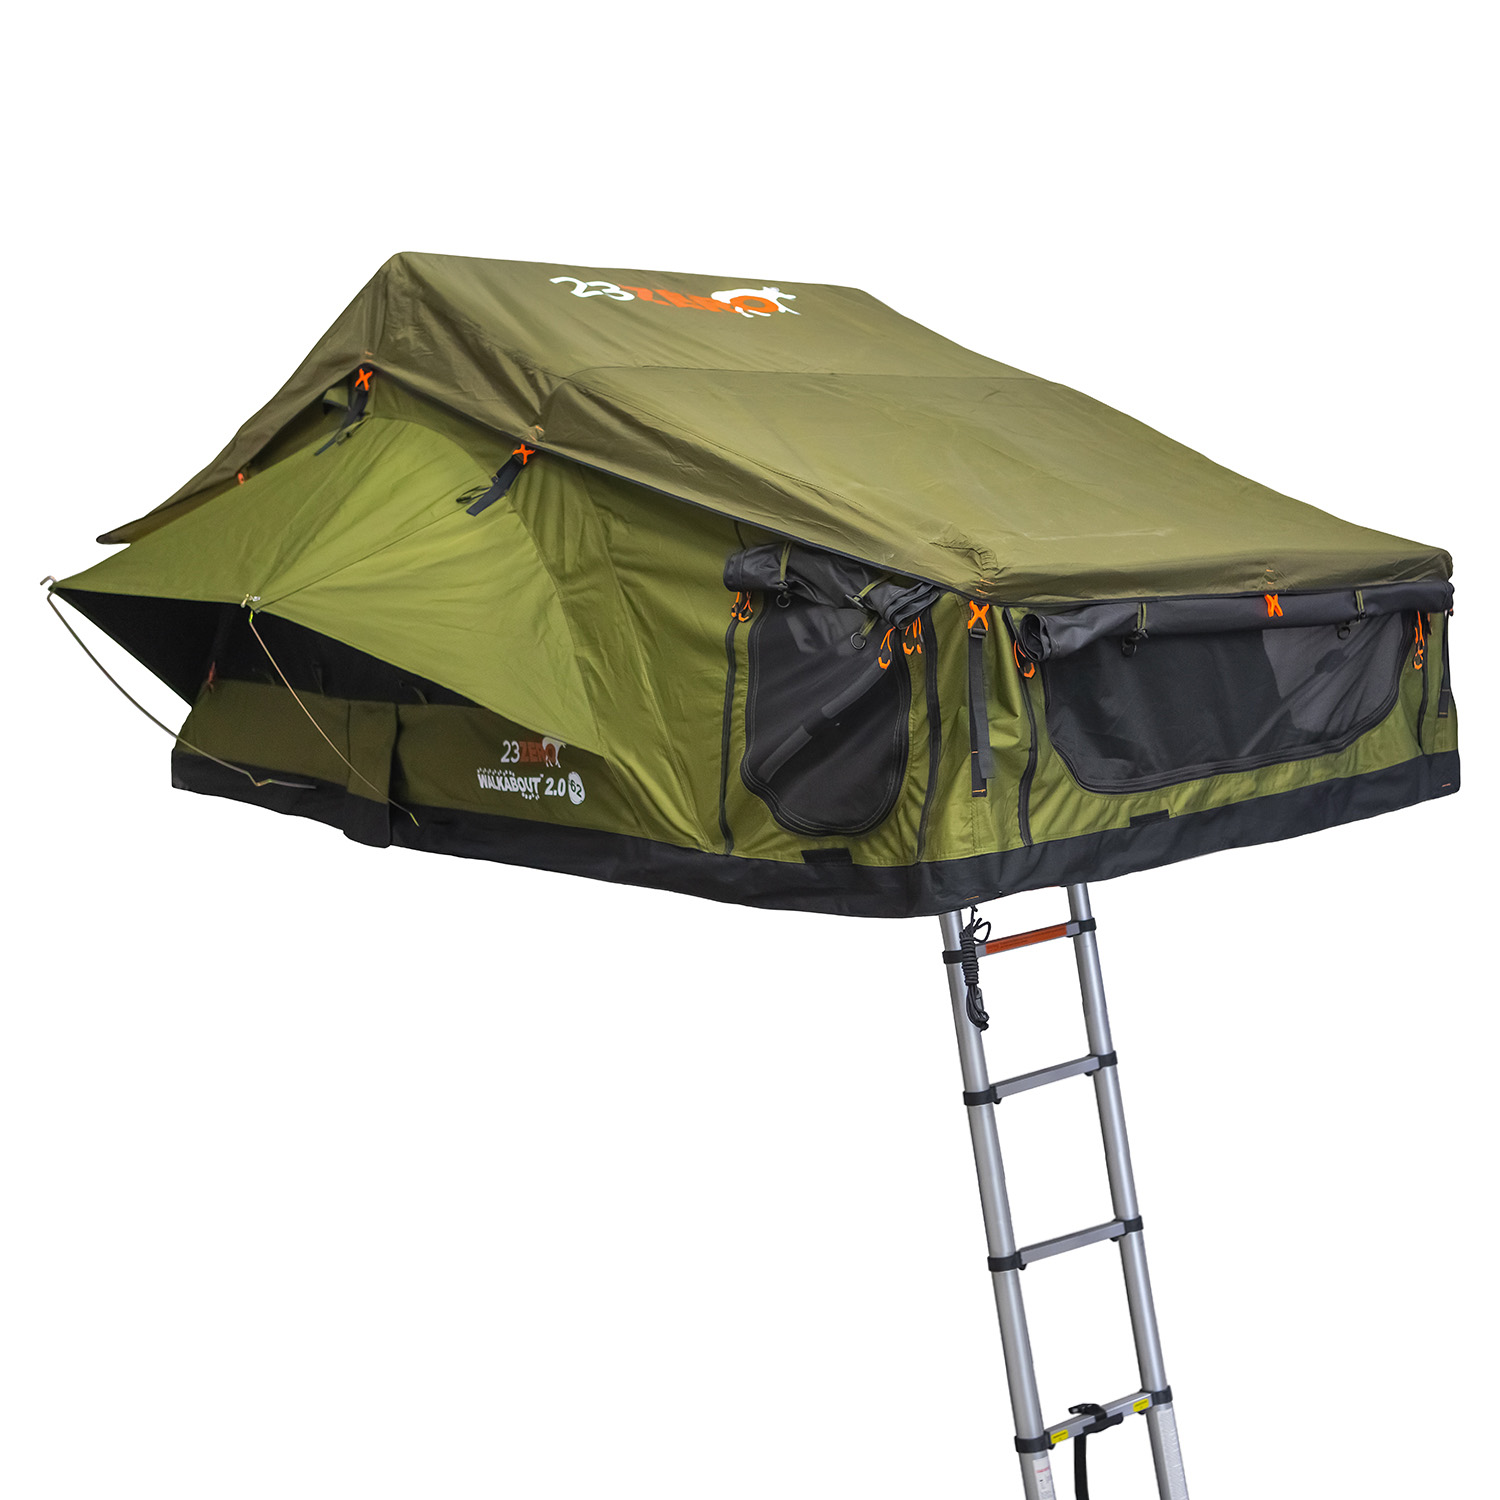 Best Soft Shell Roof Top Tent - 23ZERO Walkabout 2.0 72